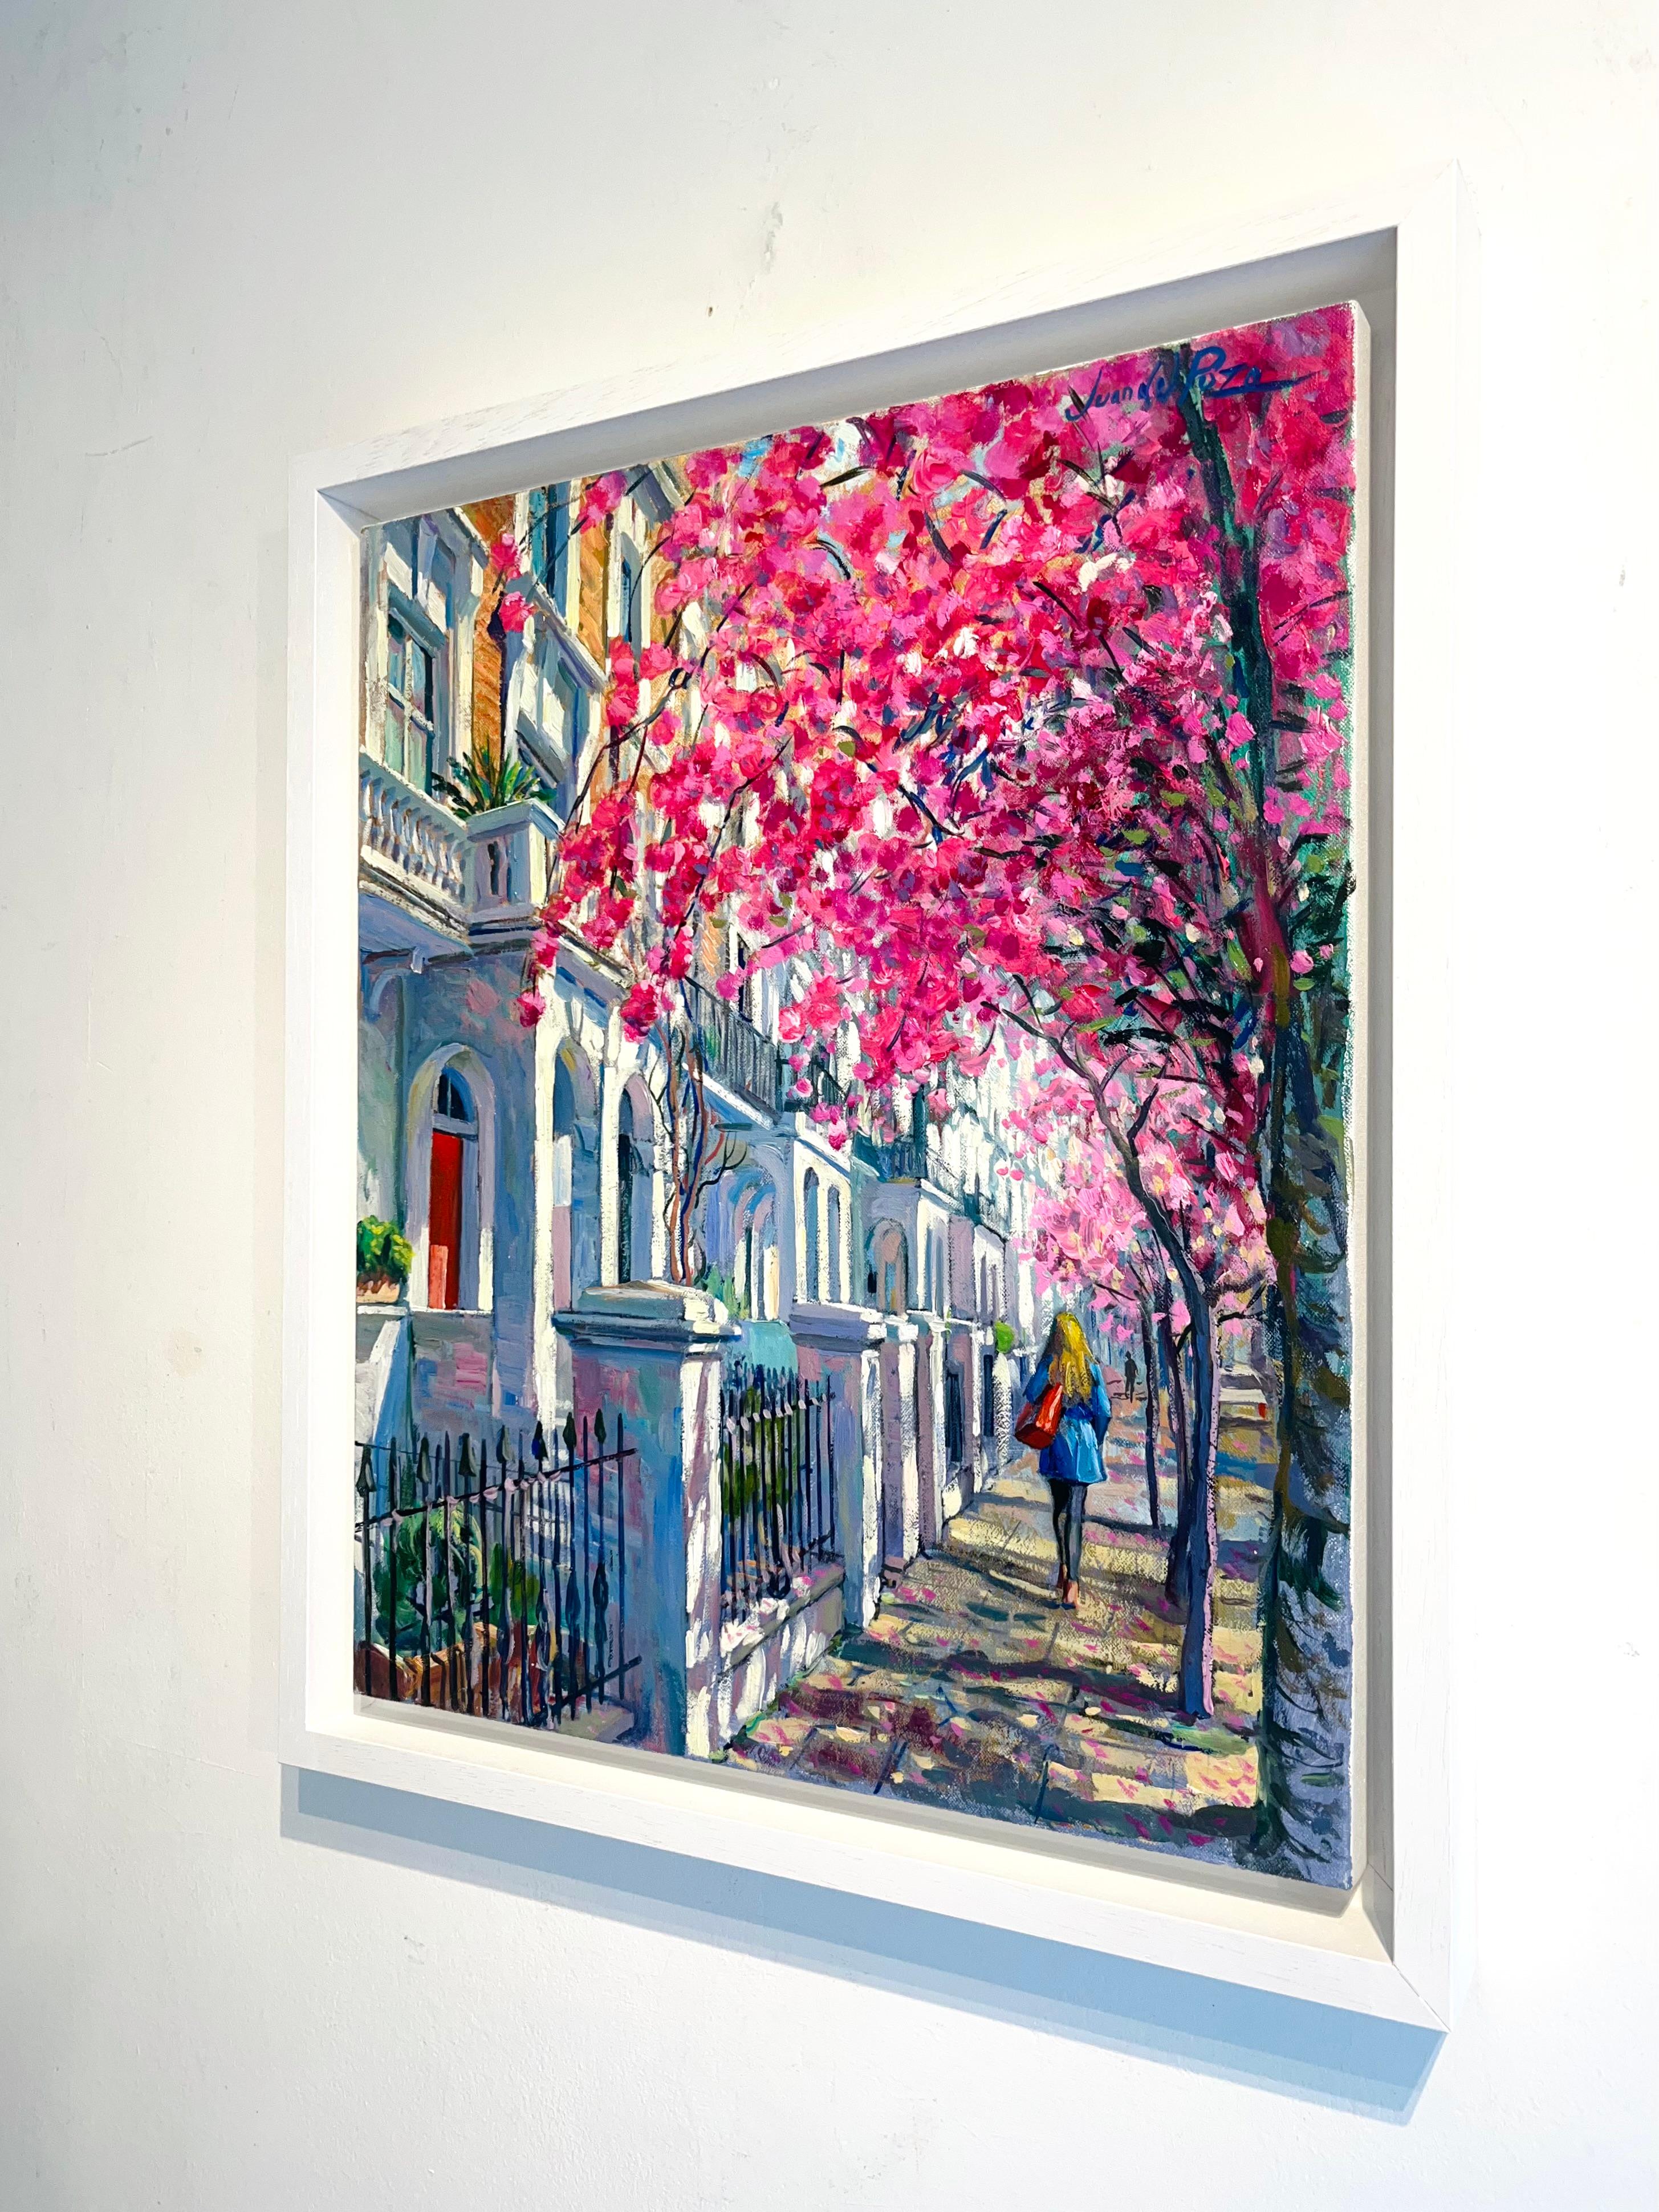 Walking Under Blossom-original impressionism cityscape blossoms oil painting-art - Impressionist Painting by Juan del Pozo